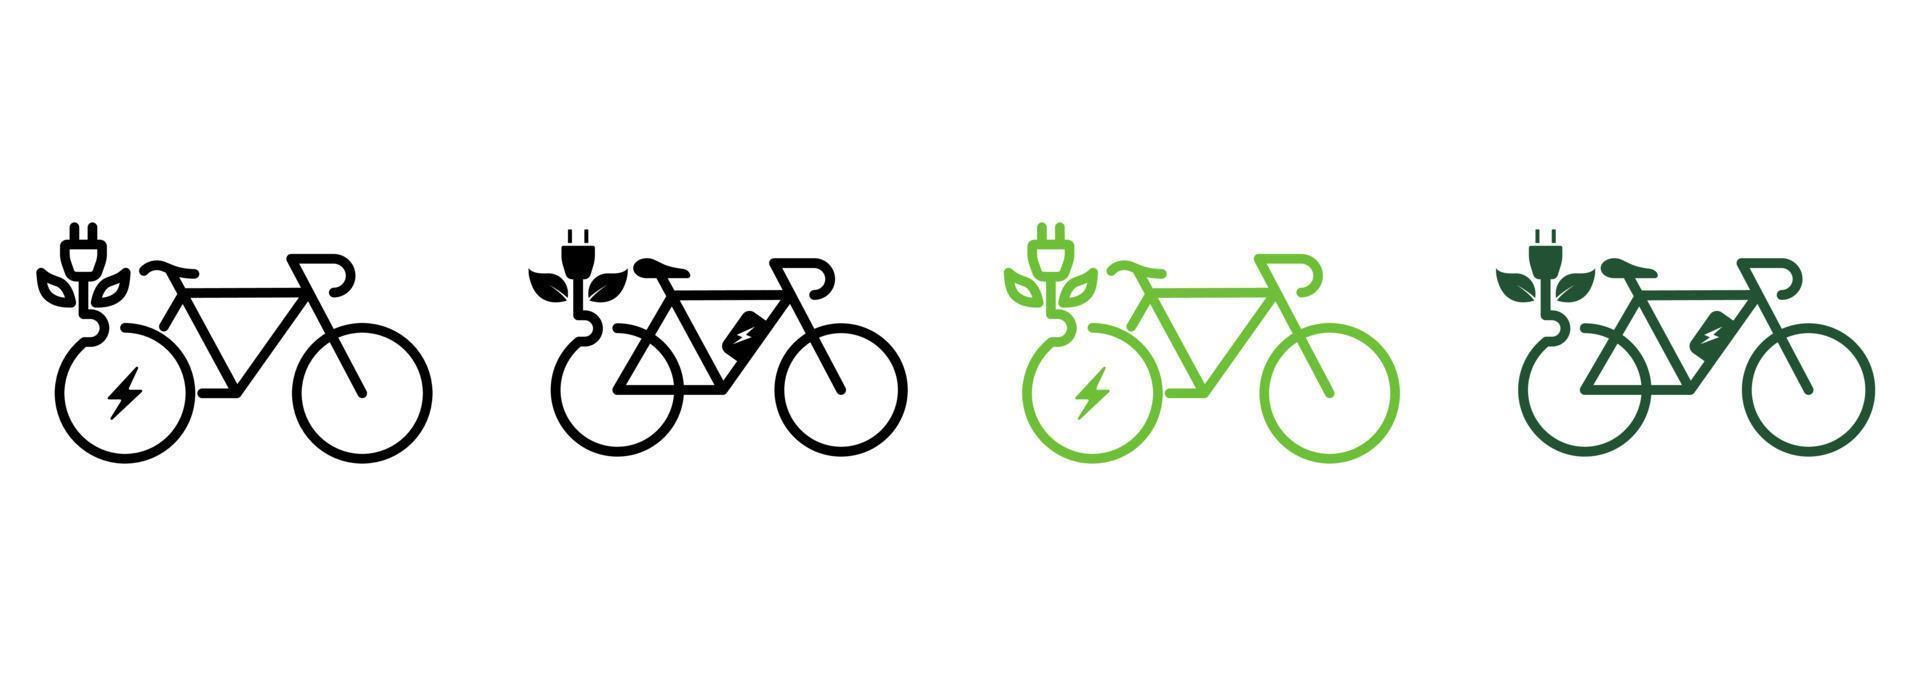 Ecology Bicycle on Electric Power with Plug and Leaf Line and Silhouette Icon Color Set. Eco Electricity City Transportation. Green Energy Bike Symbol Collection. Isolated Vector Illustration.